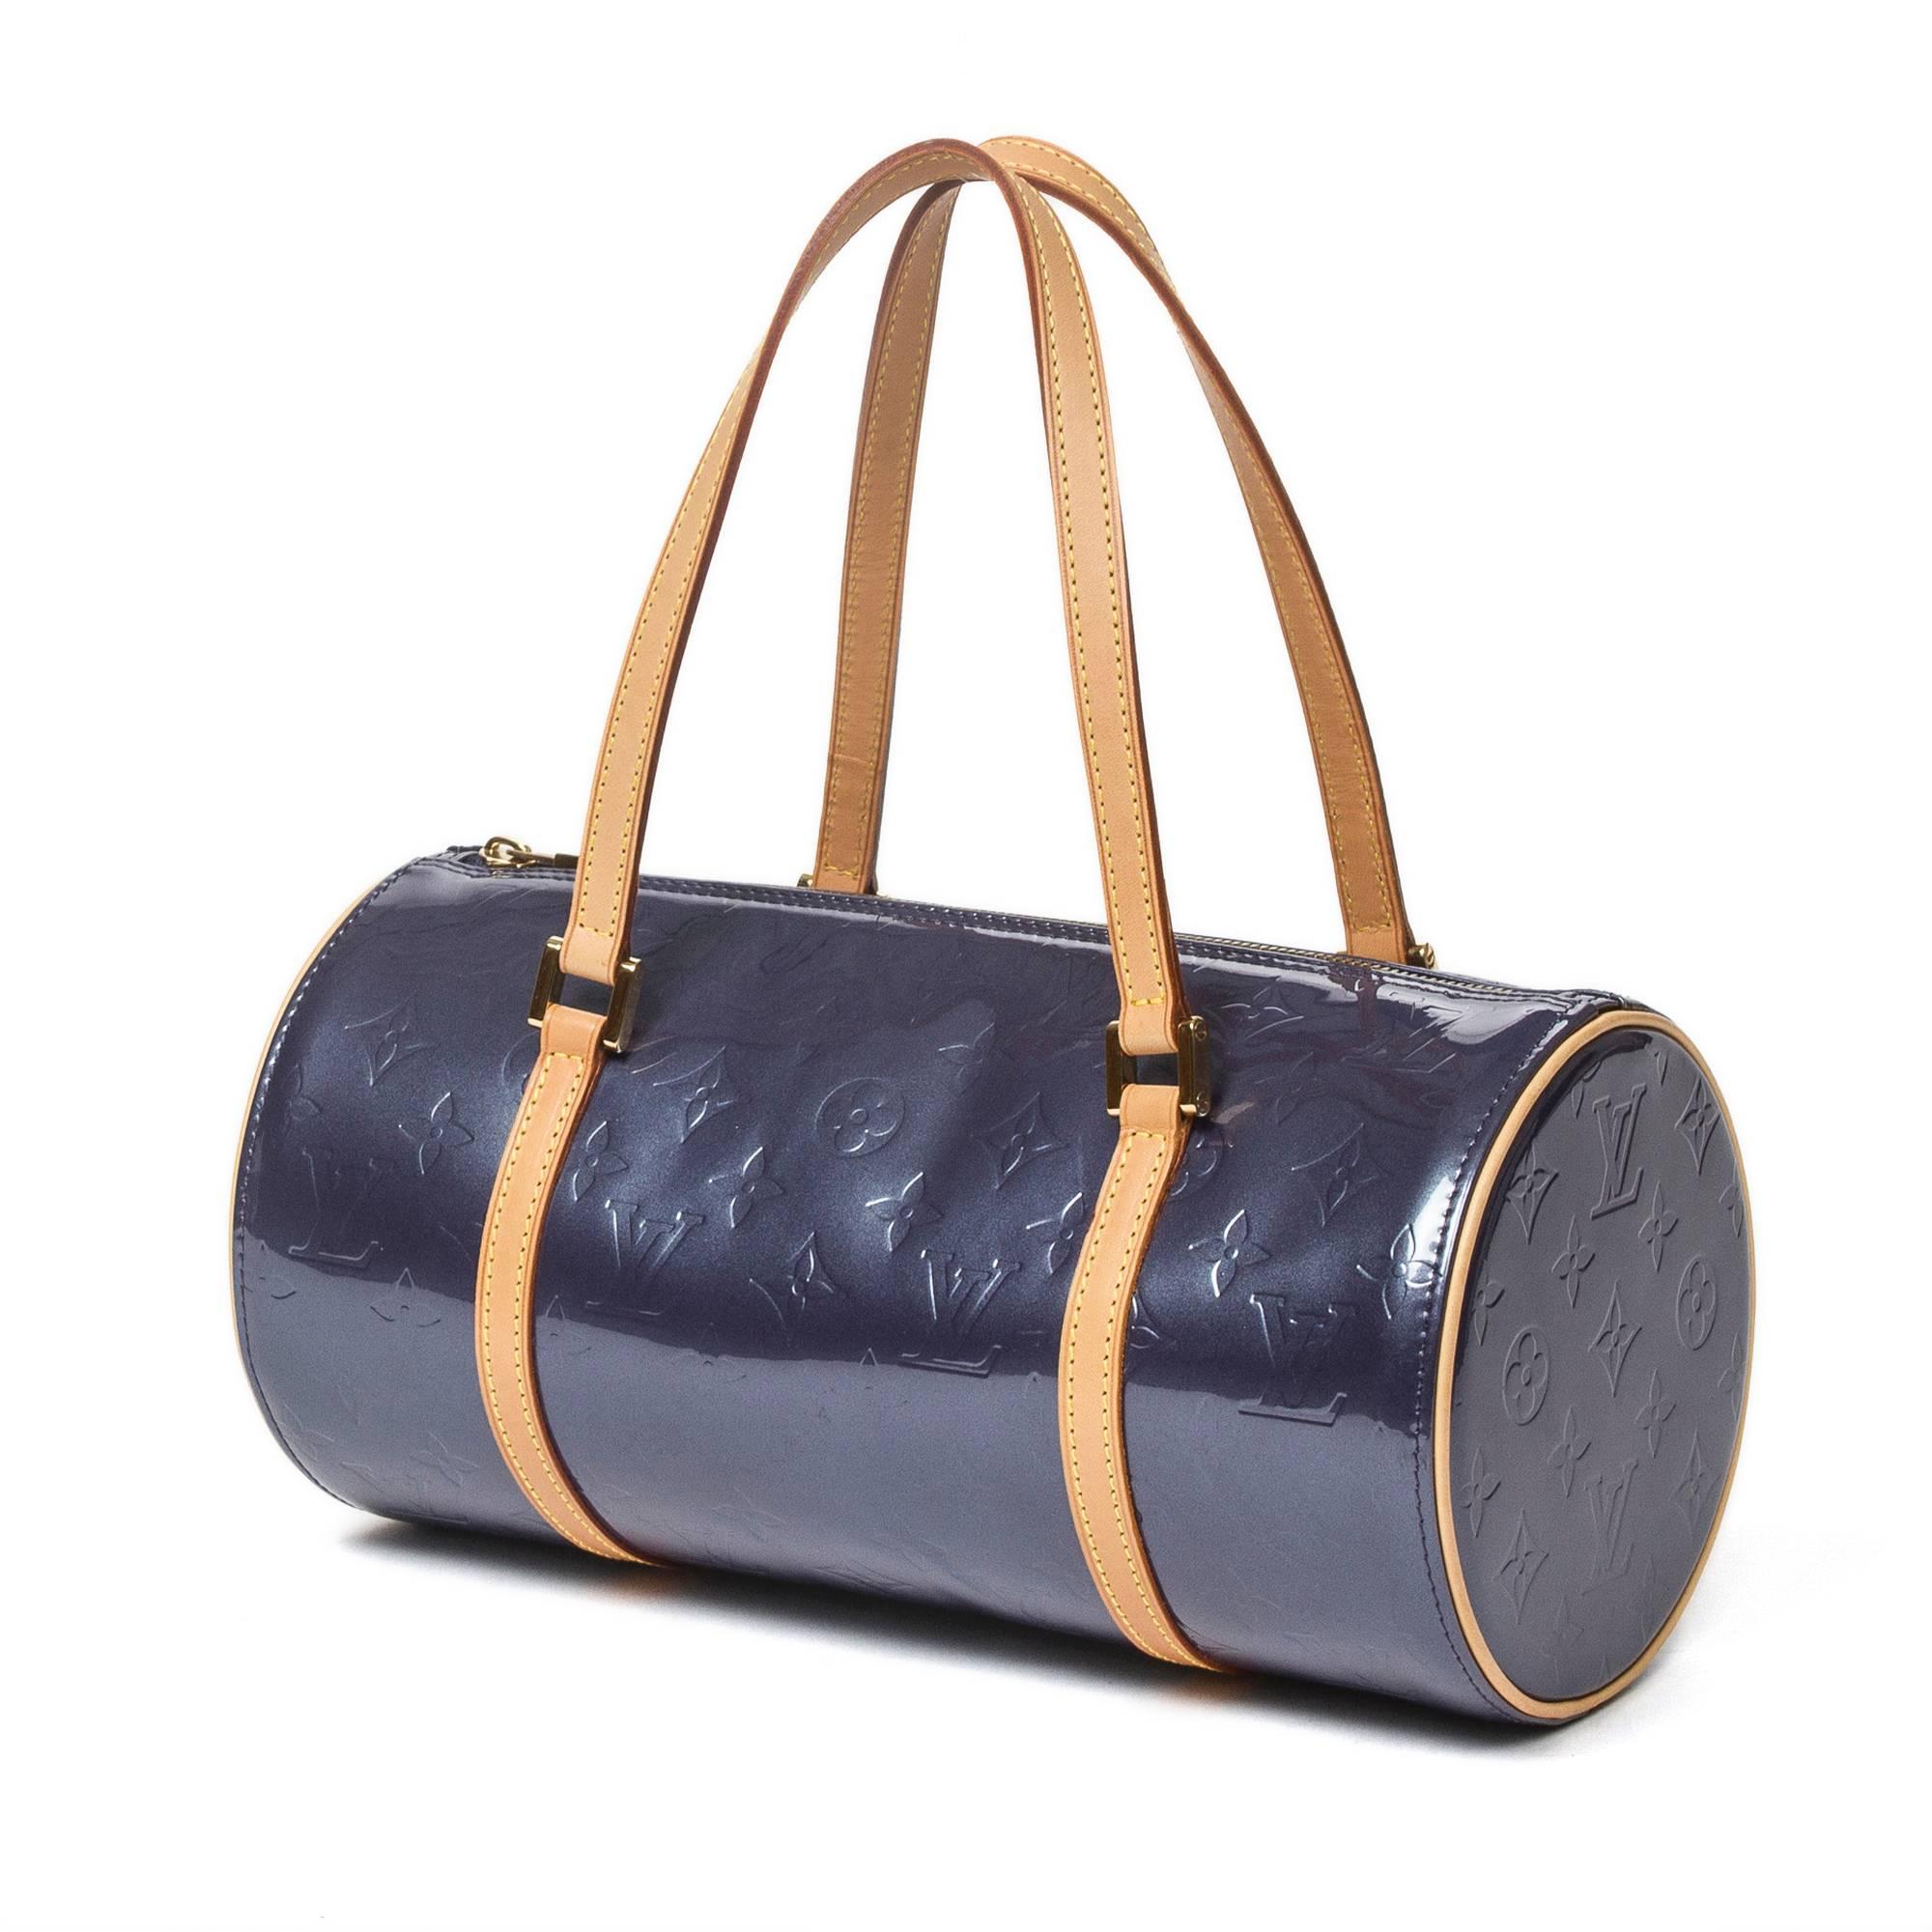 Bedford purple/blue in monogram vernis with vachetta leather handles and details, golden brass hardware. Side slip pocket. Zip closure. Purple/blue leather lined interior with 